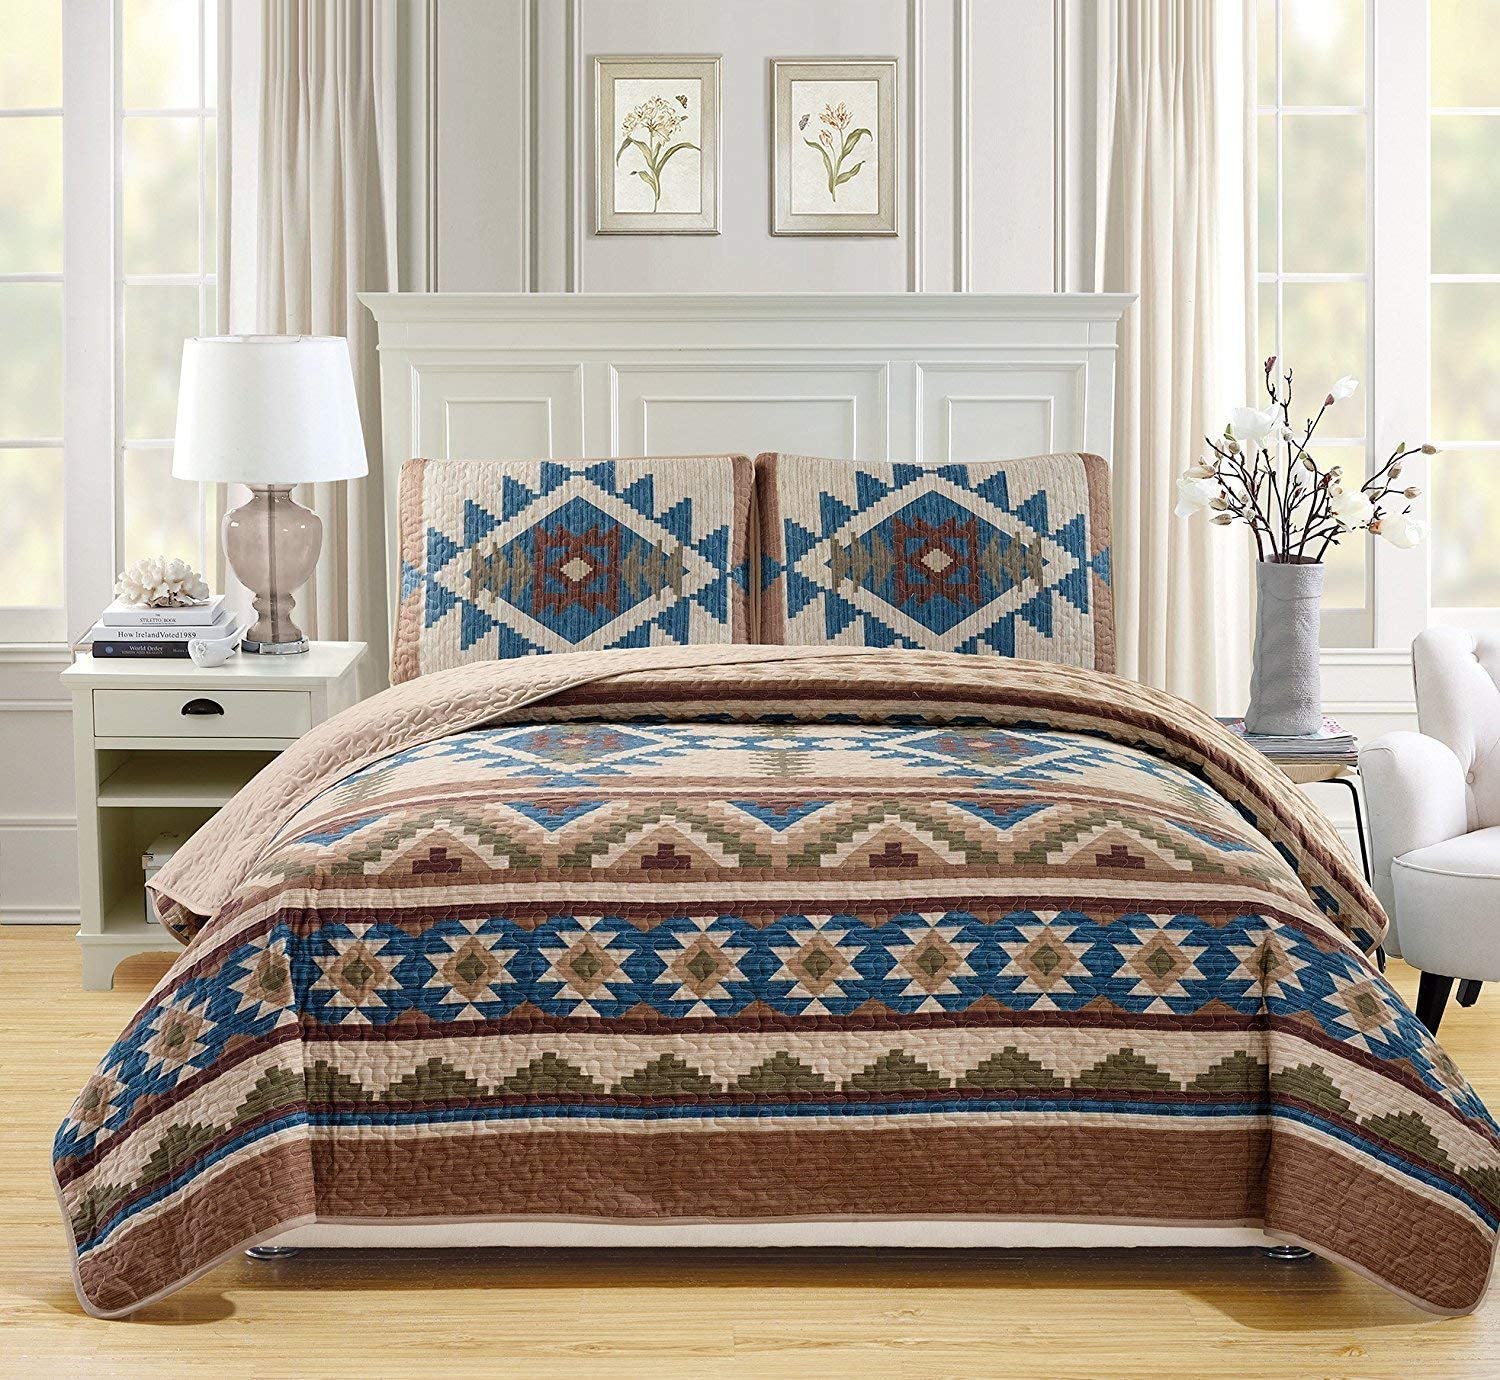 Southwestern an Santa Fe style bedspreads, blankets, throws in southwestern designs that are great decorative accessories for your southwestern bedroom decor. Low prices from an established on line catalog store.